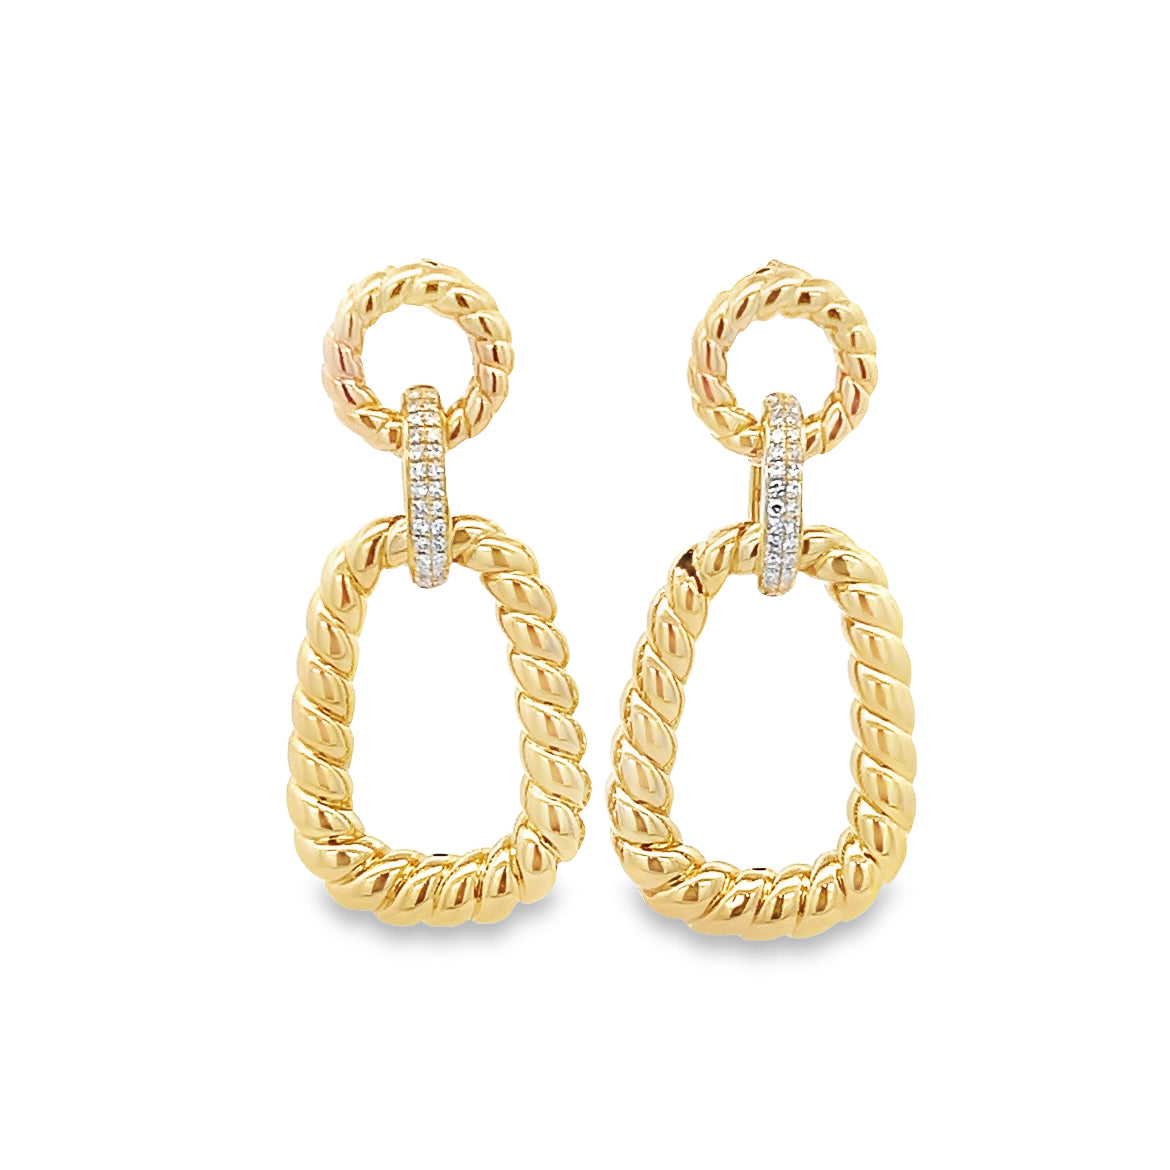 14K GOLD TWO CIRCLE TWISTED EARRINGS